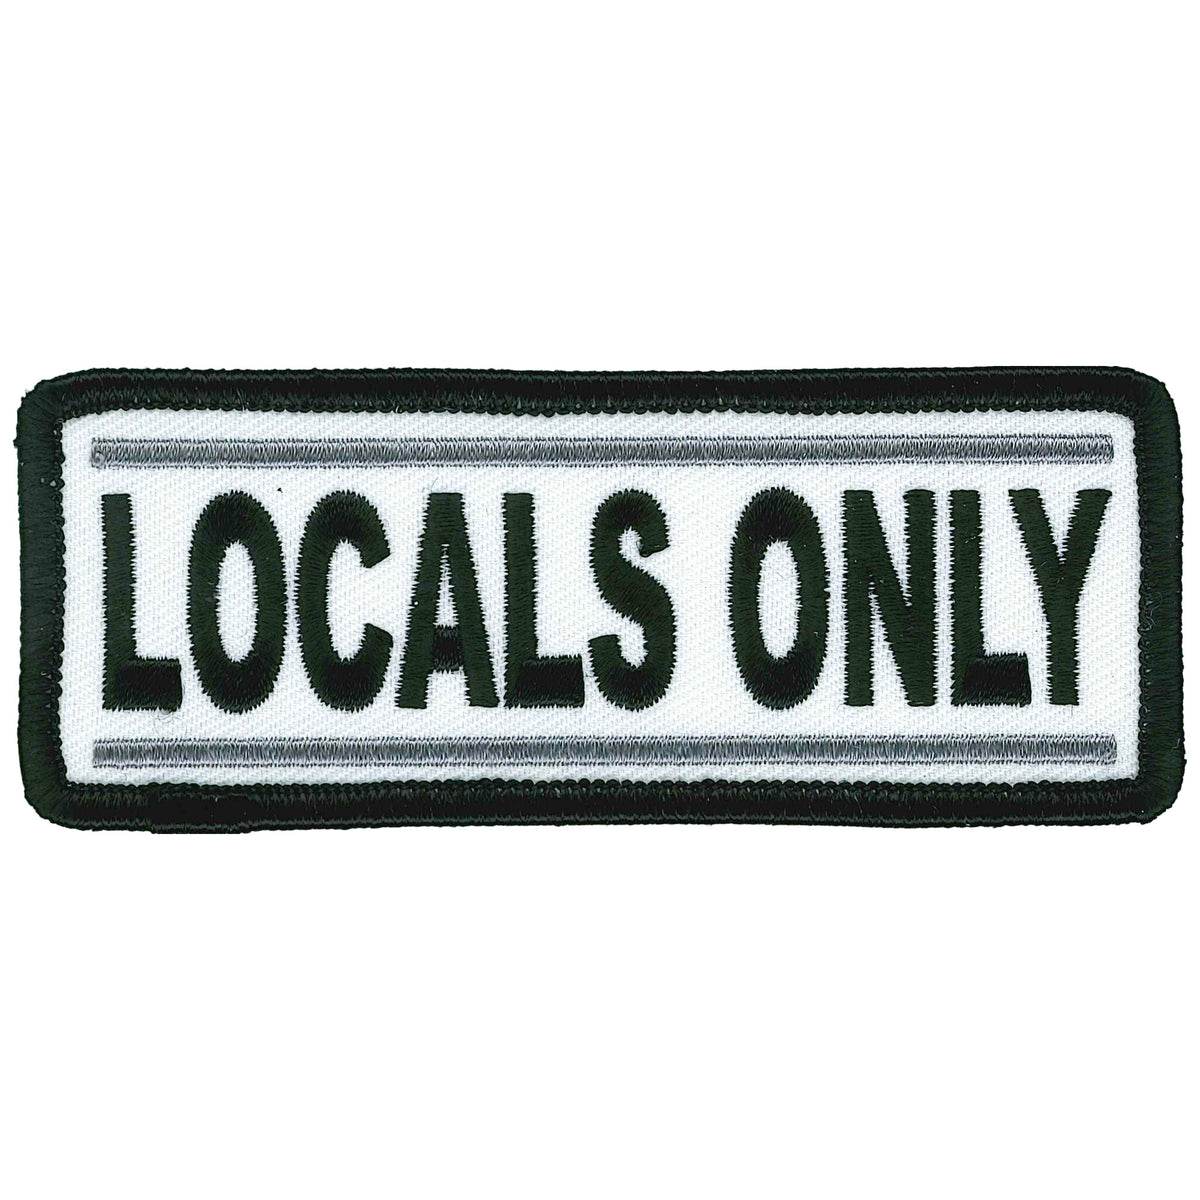 Locals Only Funny Iron on Patch